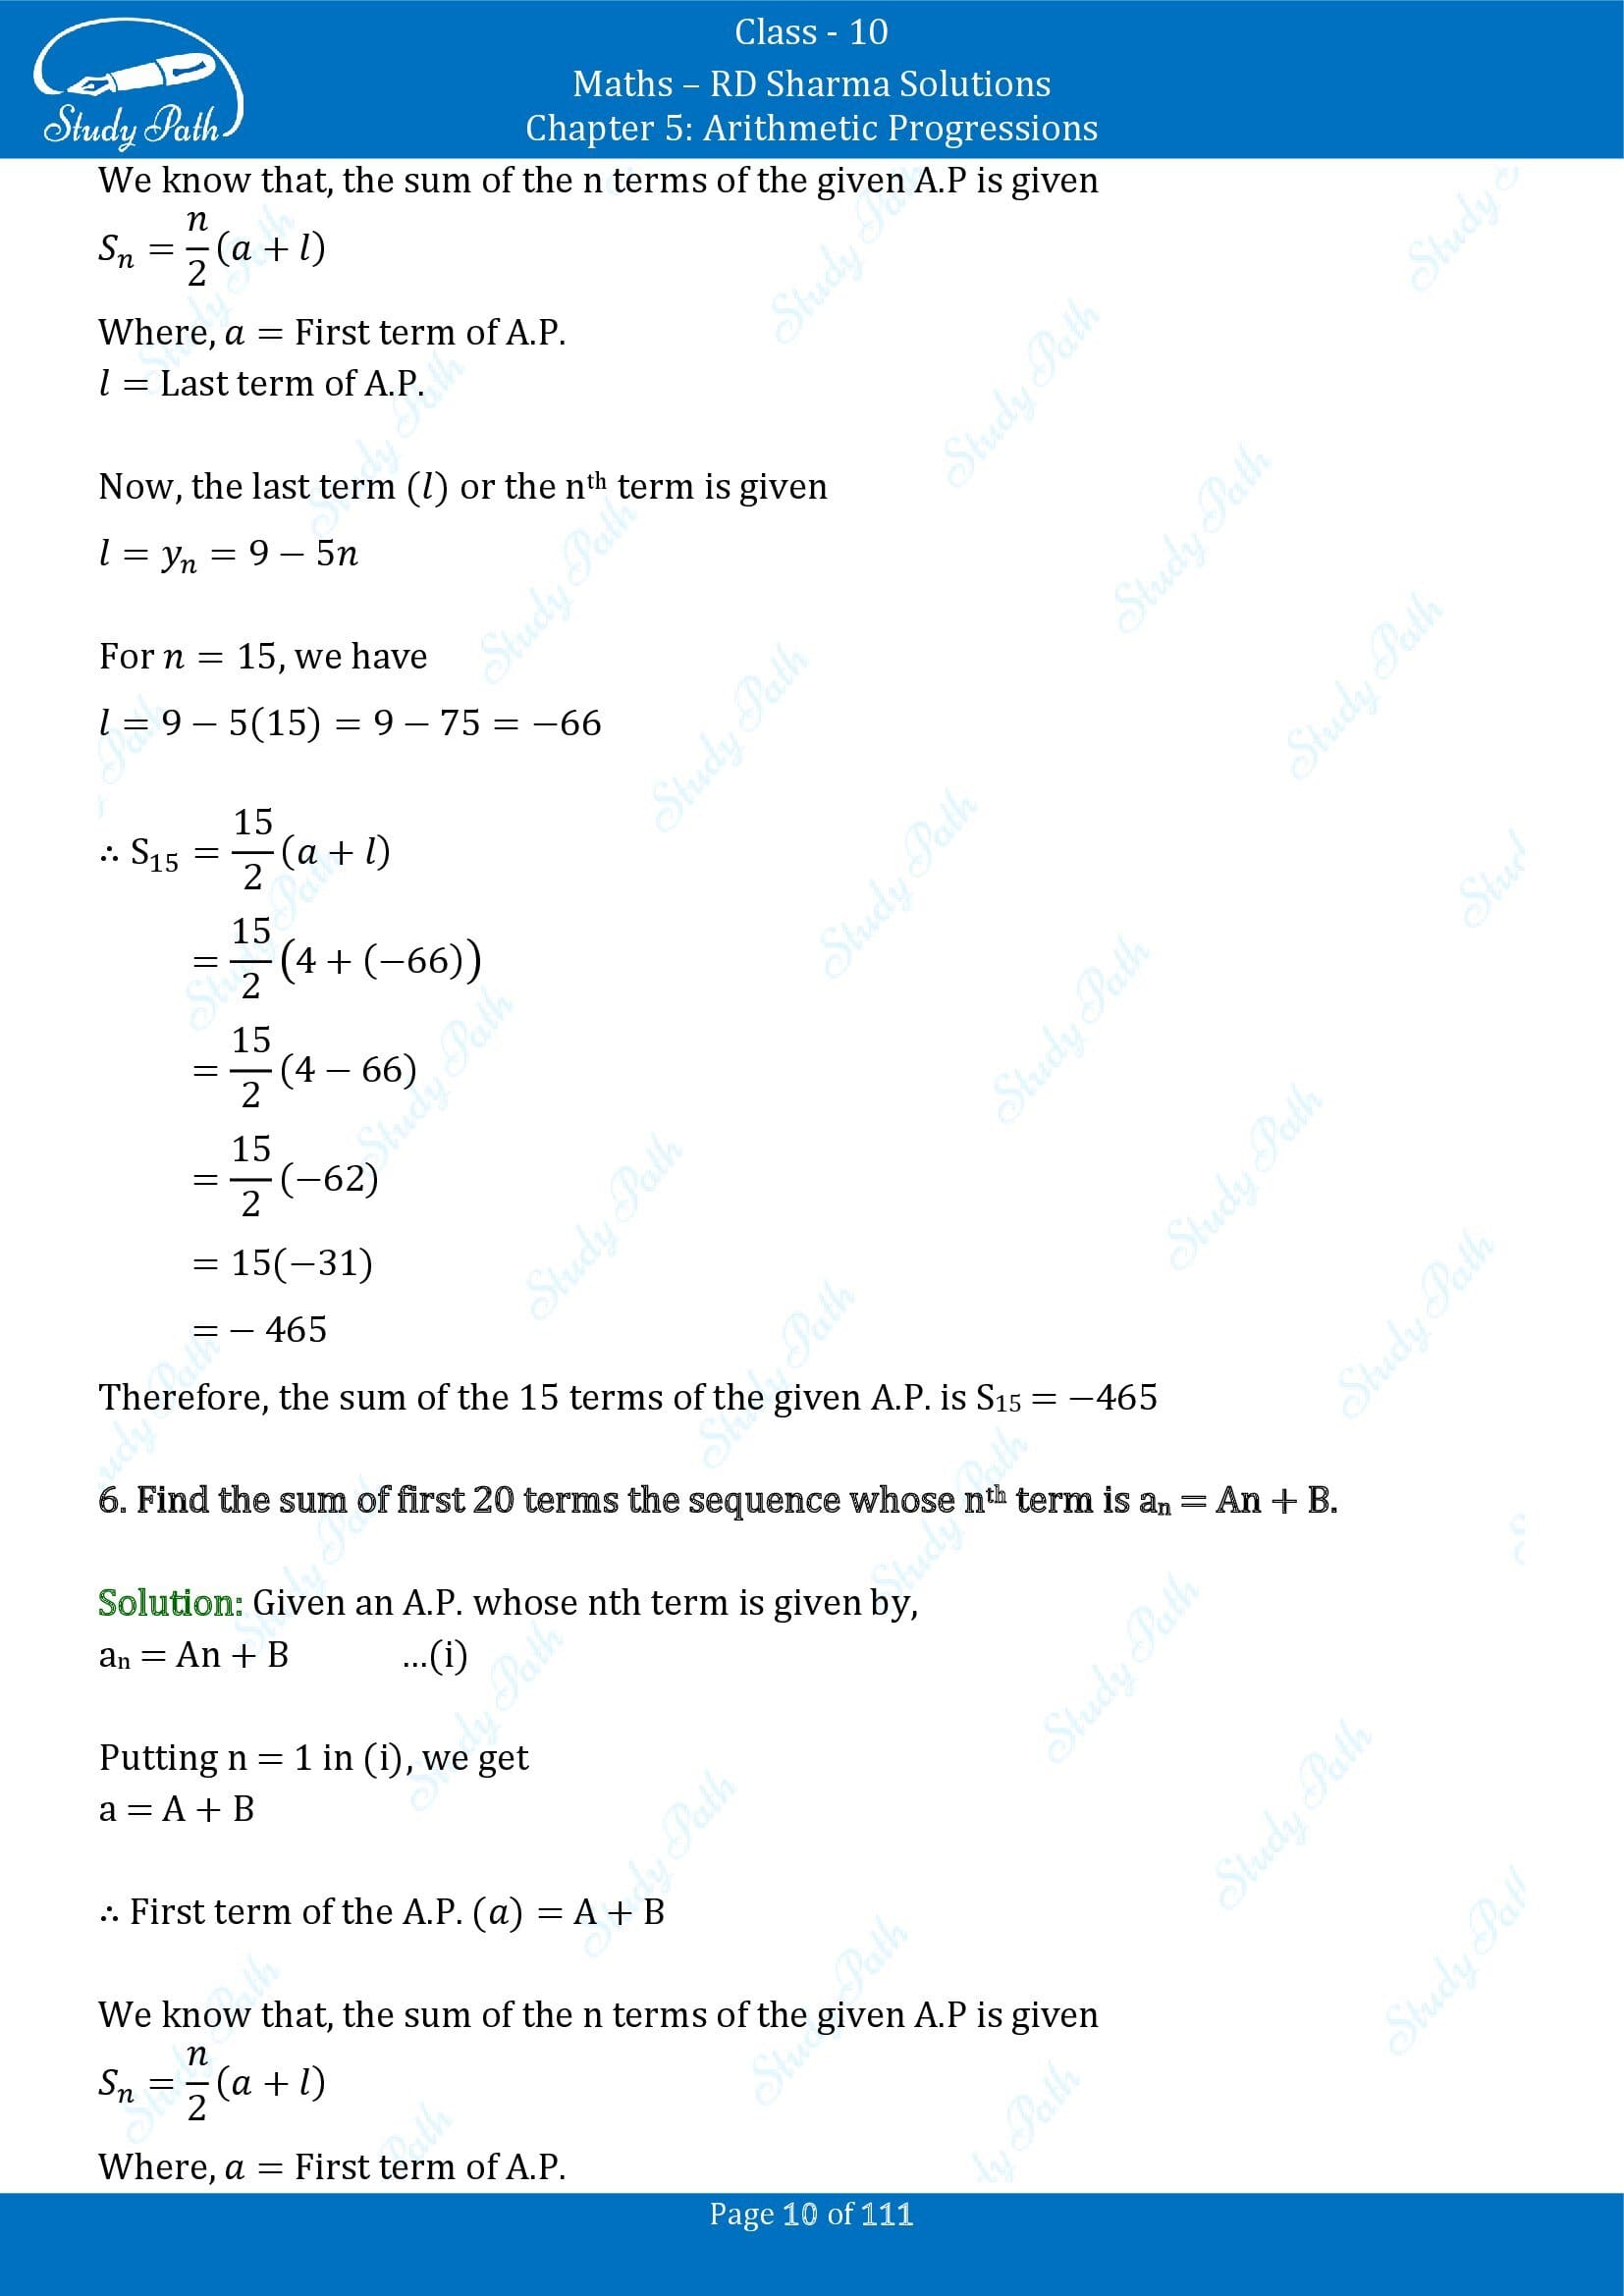 RD Sharma Solutions Class 10 Chapter 5 Arithmetic Progressions Exercise 5.6 00010